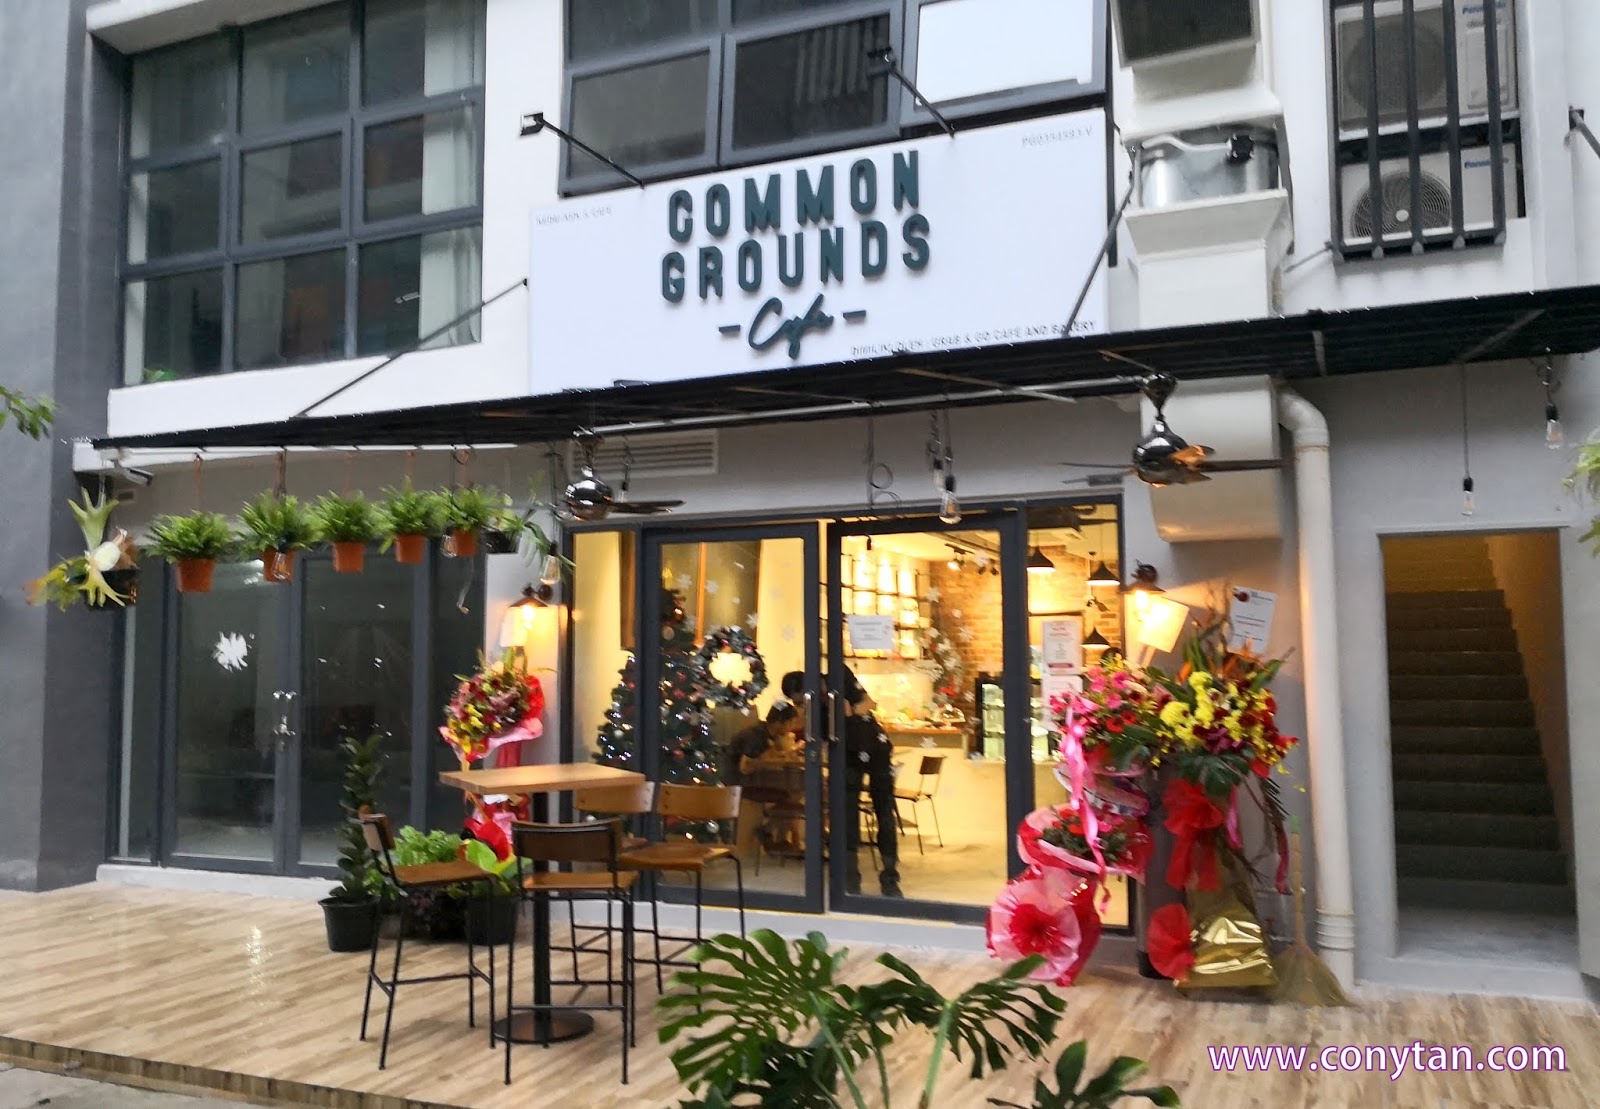 Cony In Blogging Common Grounds Cafe The Promenade Bayan Baru Penang 槟城咖啡馆